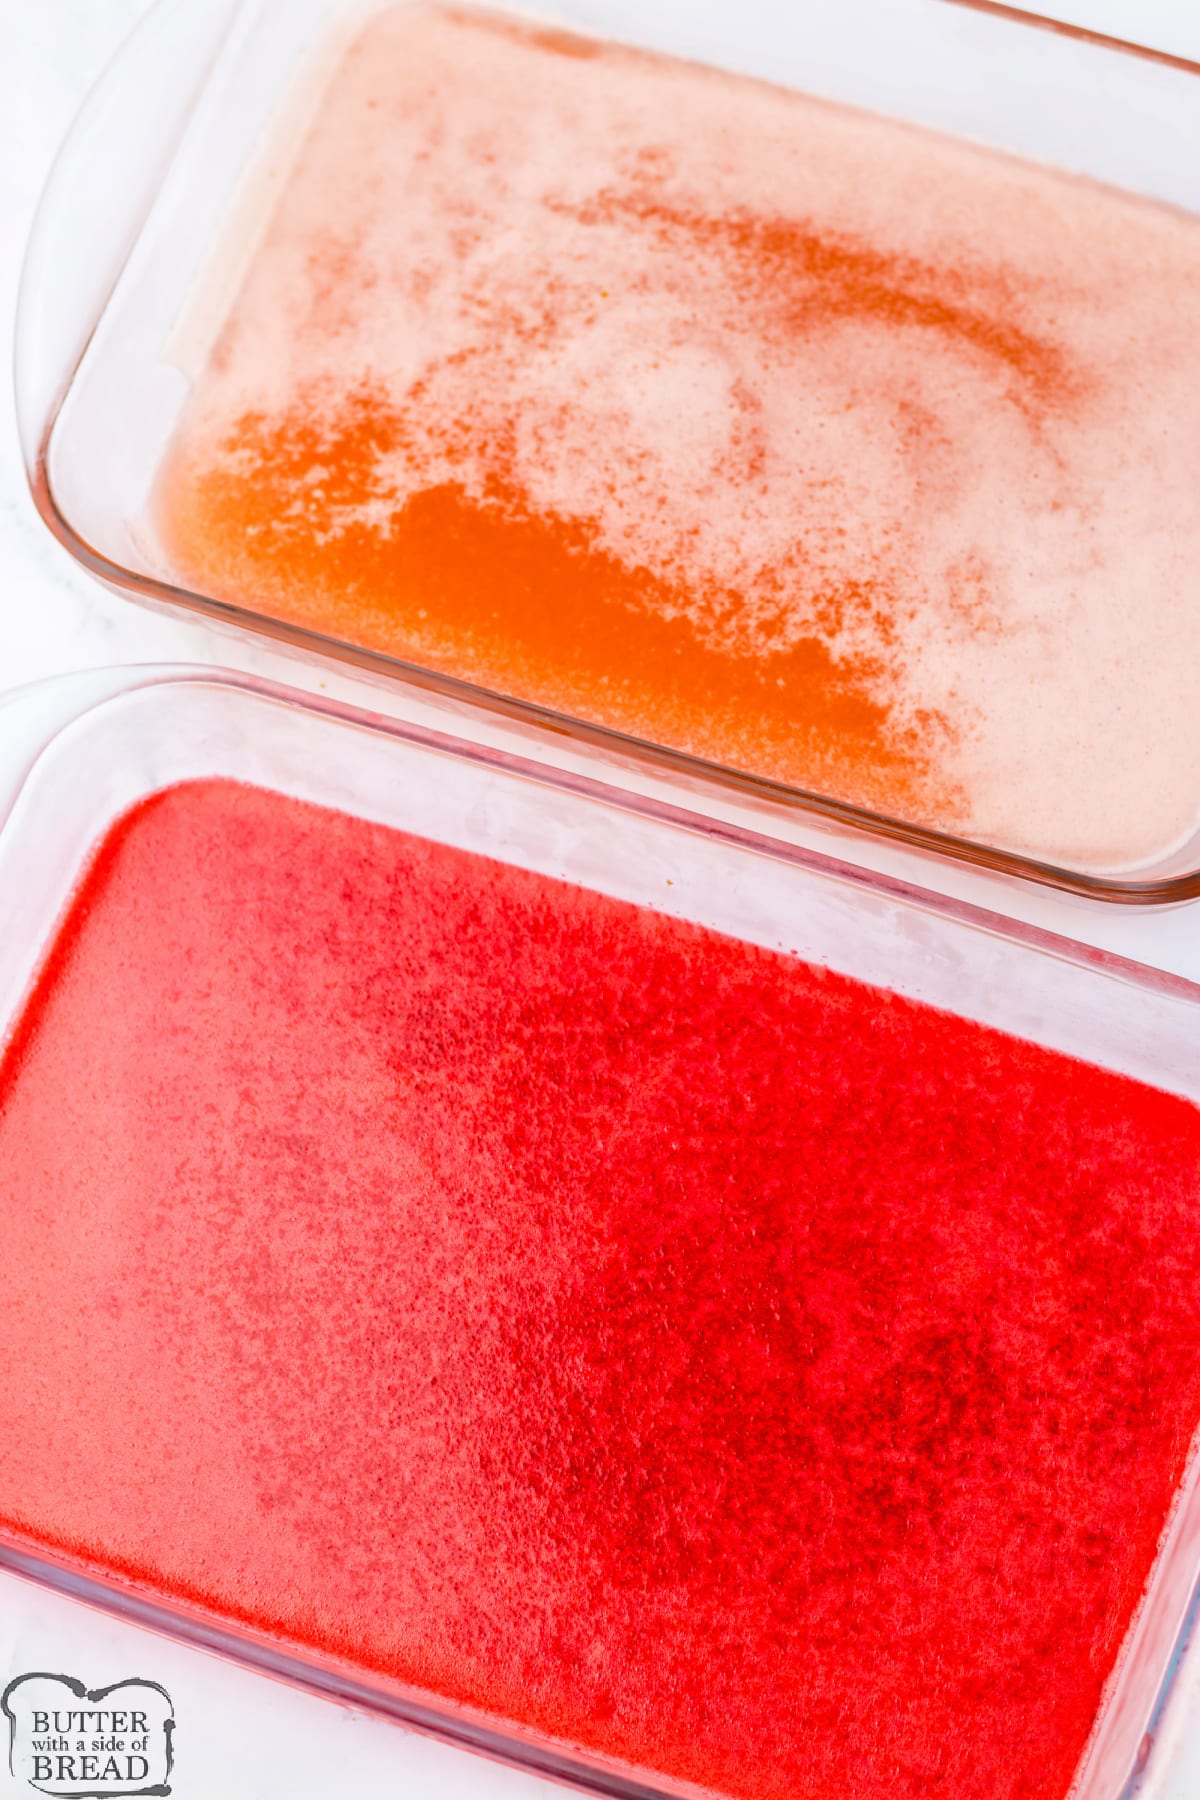 Chill gelatin mixture in two pans. 